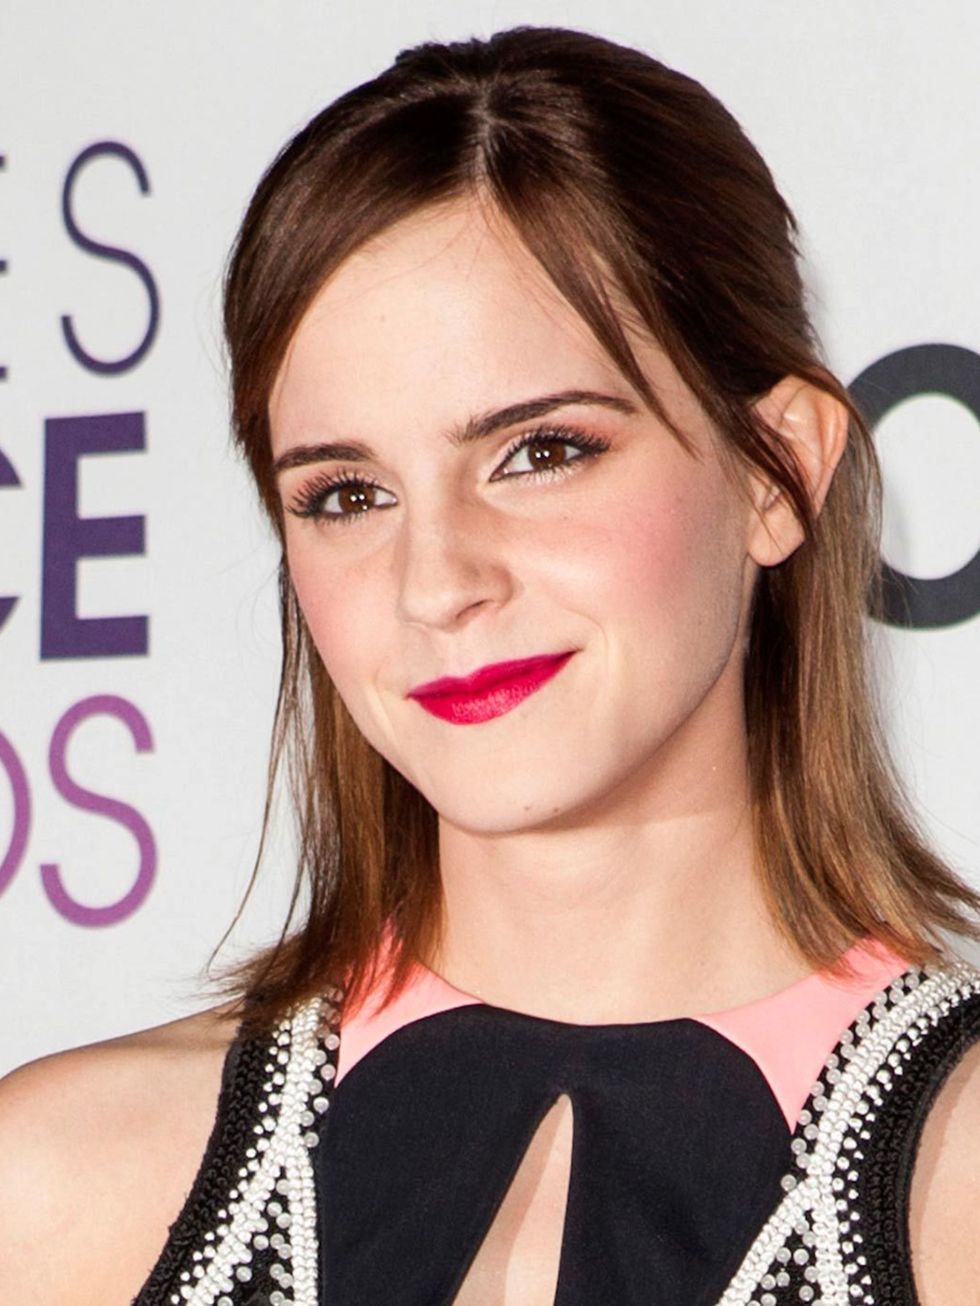 <p><a href="http://www.elleuk.com/star-style/celebrity-style-files/emma-watson">Emma Watson</a> at the People's Choice Awards in LA.</p>